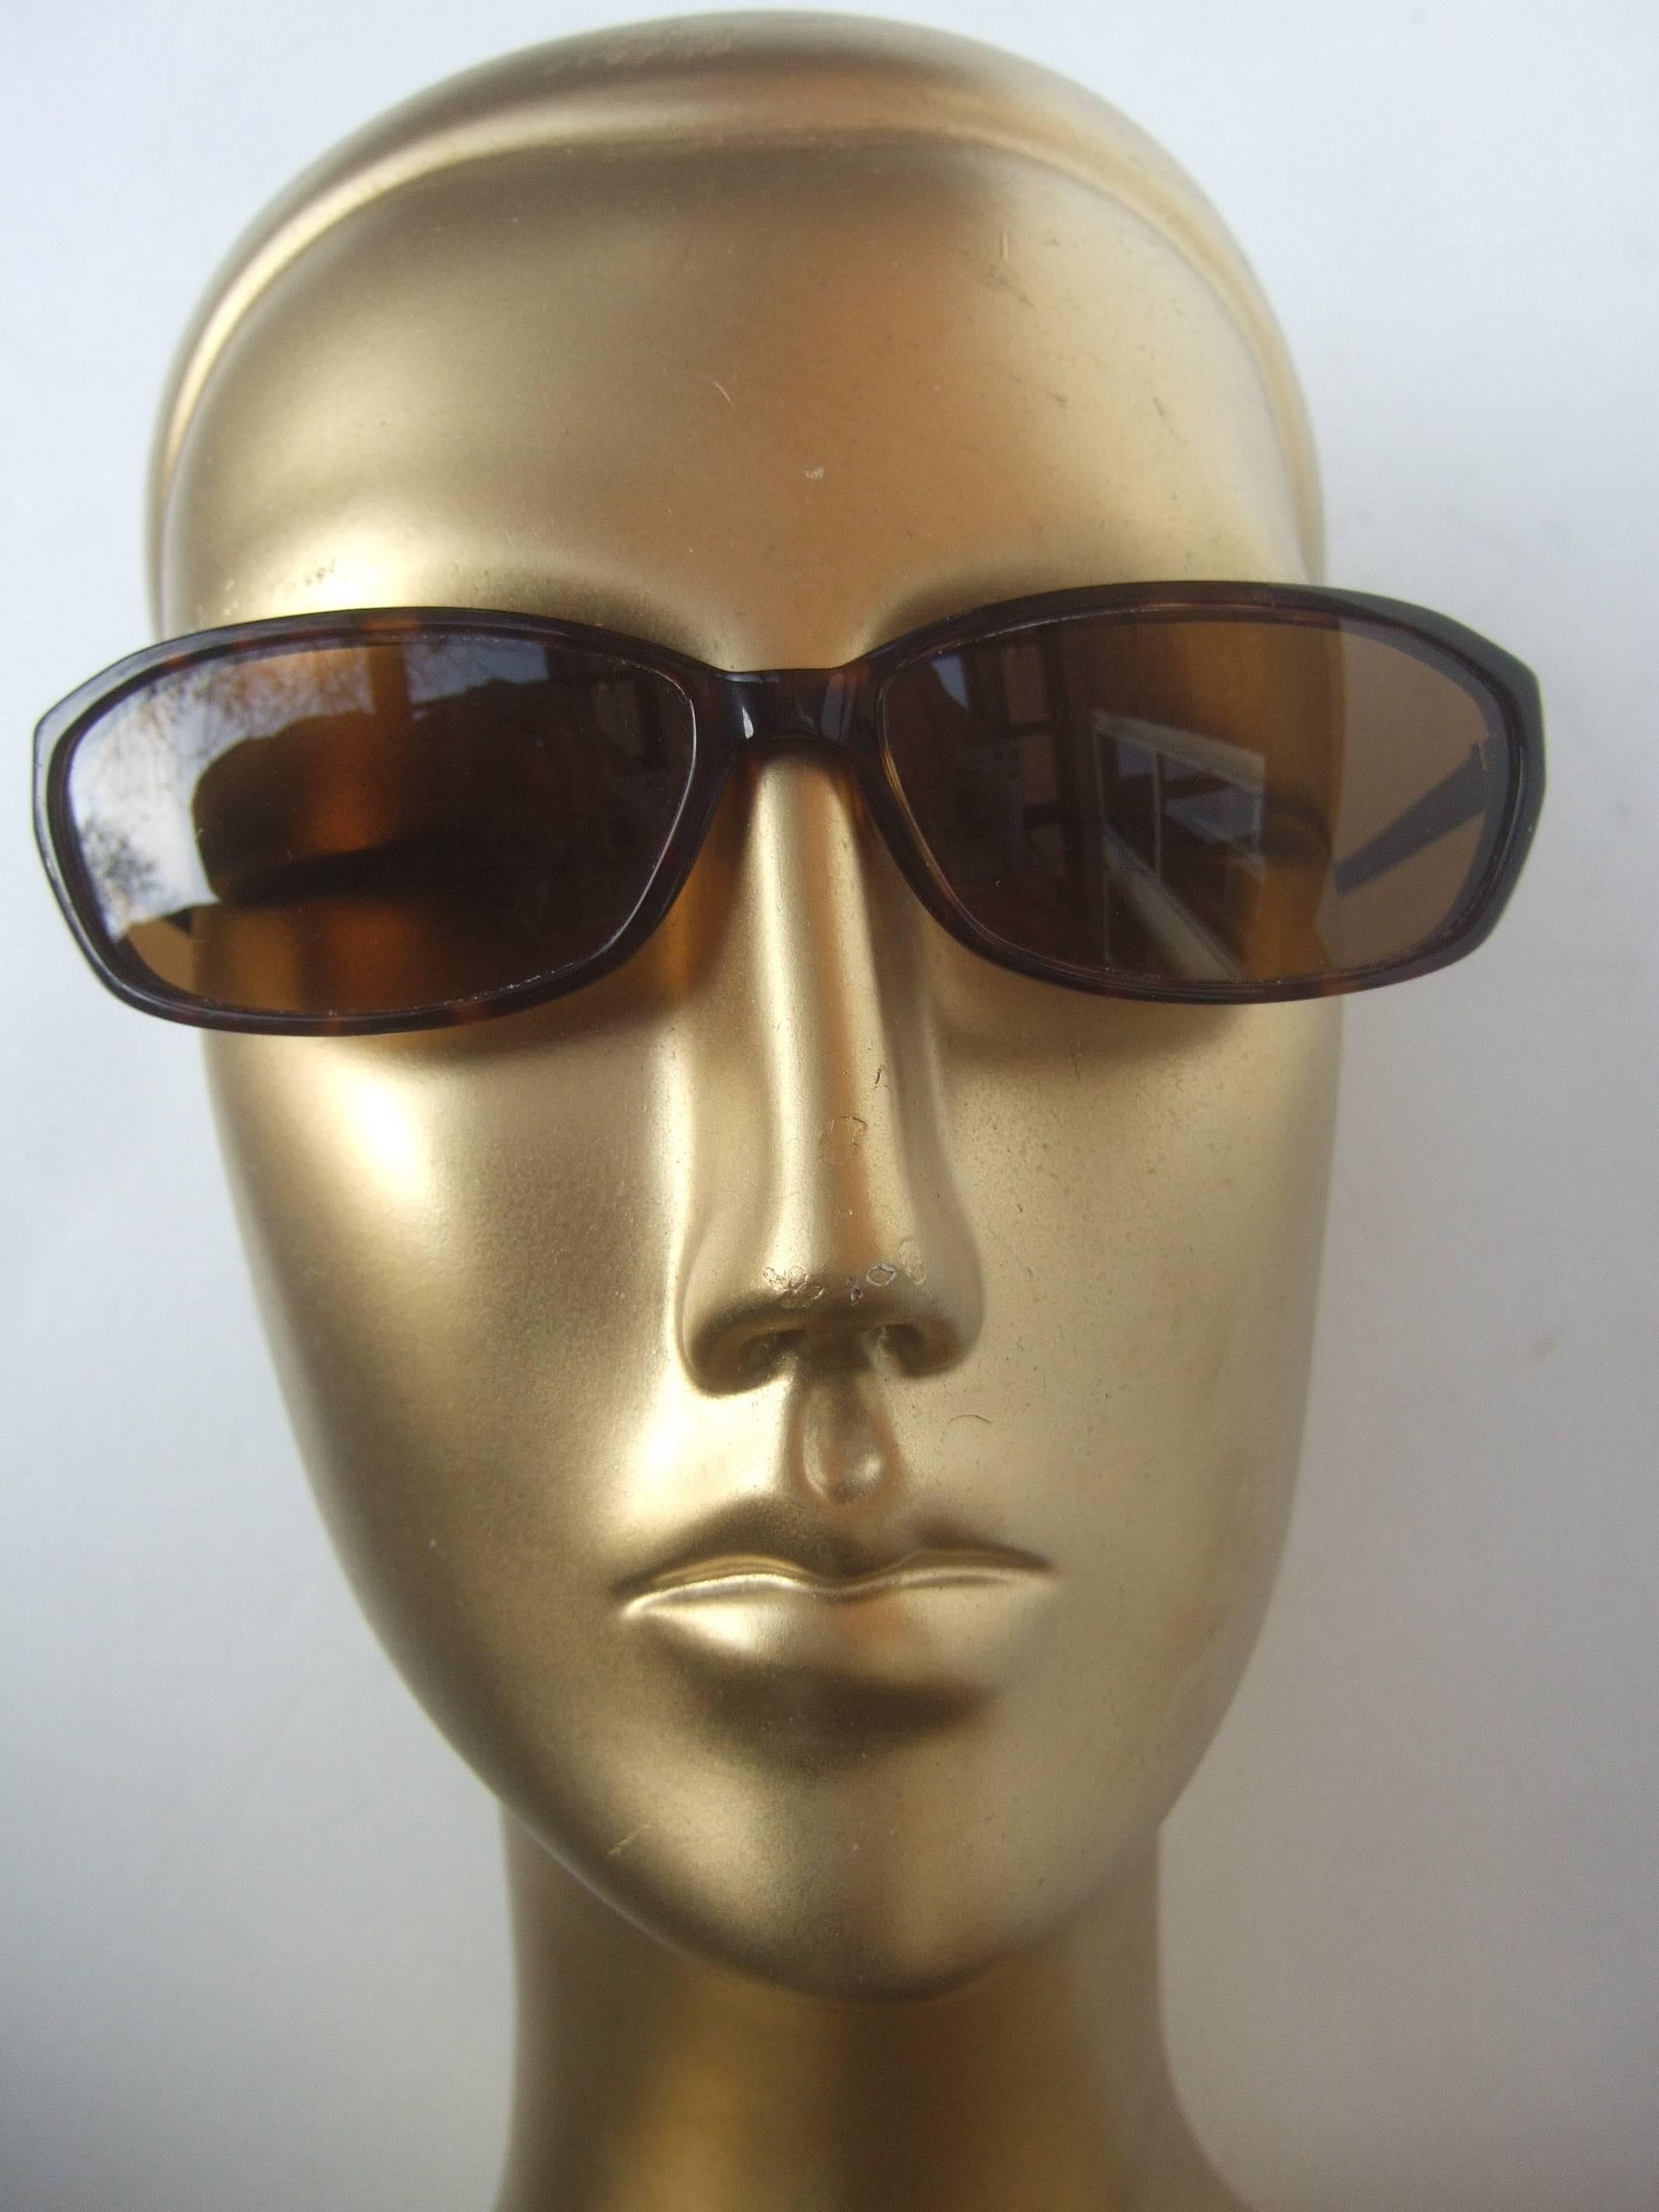 Moschino Tortoise Shell Brown Lucite Lens Sunglasses in Case In Good Condition For Sale In University City, MO